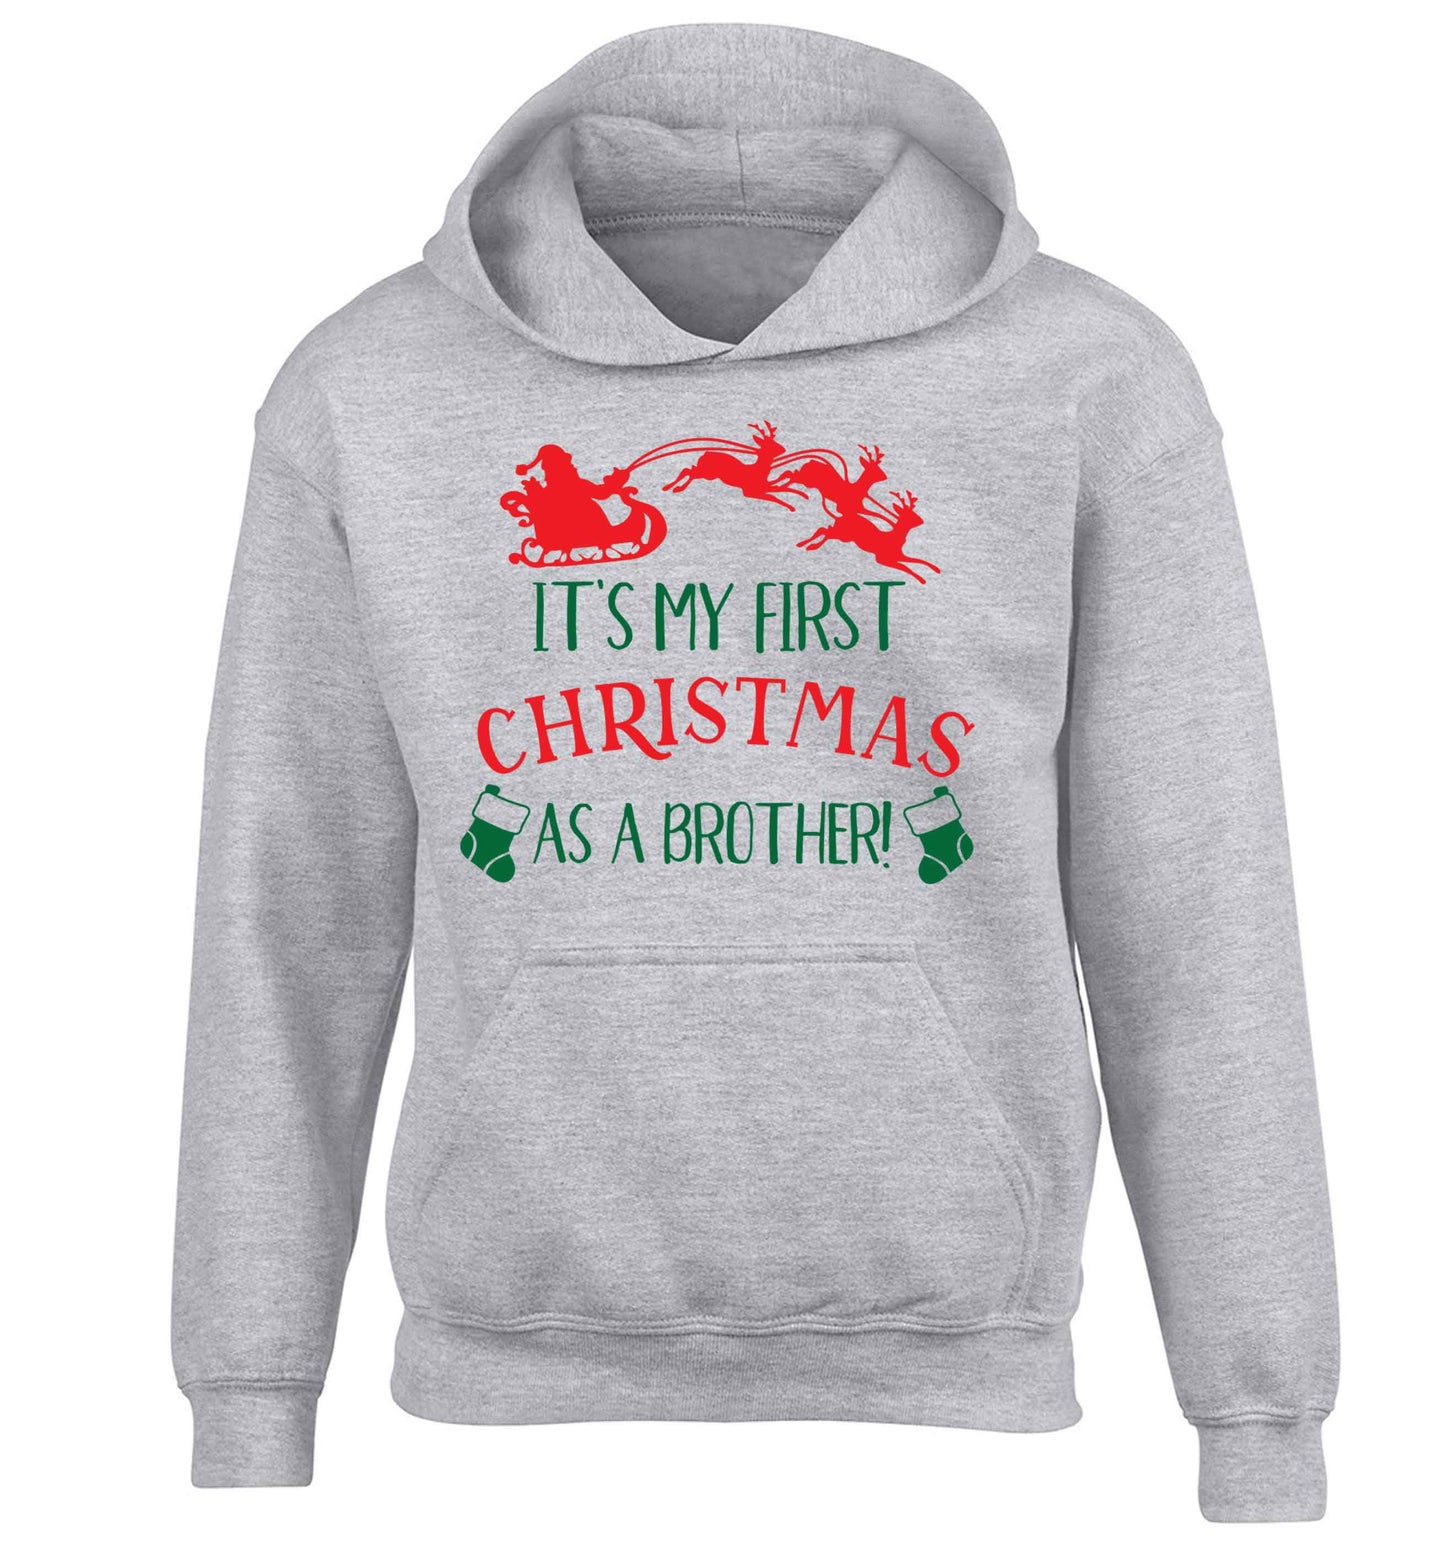 It's my first Christmas as a brother! children's grey hoodie 12-13 Years